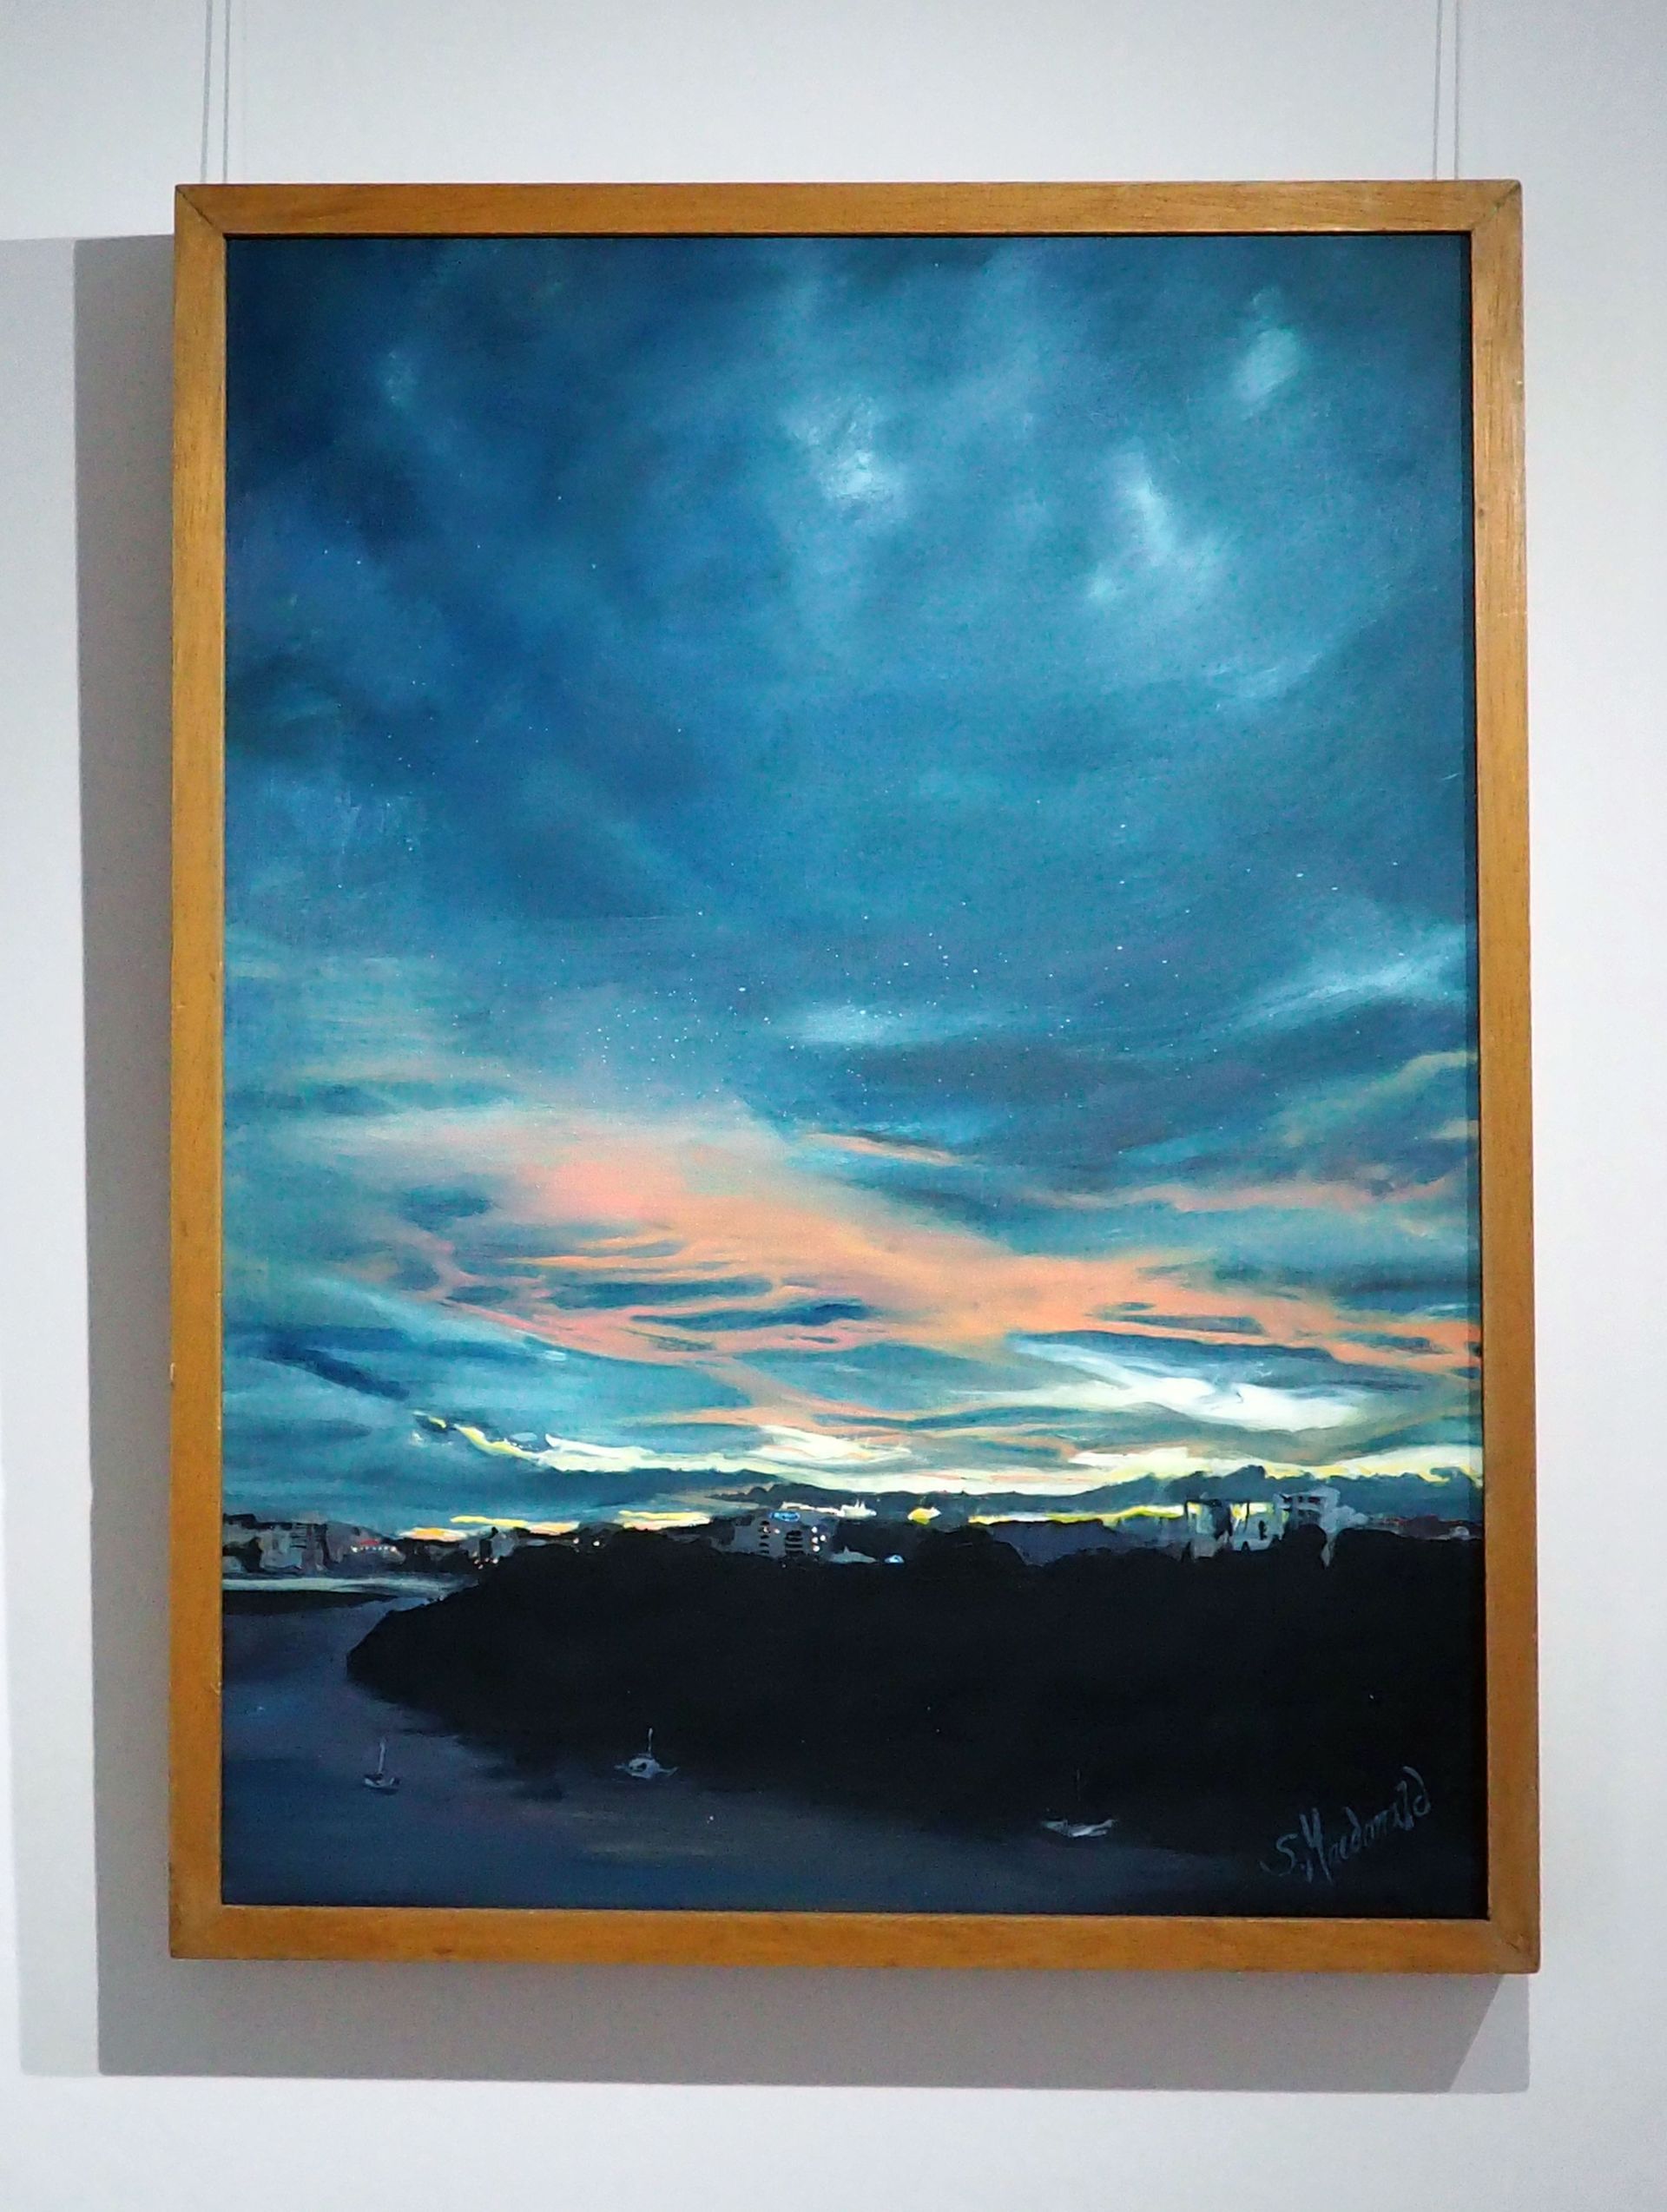 Portrait canvas of mainly a clouded sky during sunset. There is yellow light on the horizon and peach highlighted clouds with the majority of clouds dark blue. There is a headland with a river wrapped around - backlit by the sunset. Tiny boats and buildings.The sky mainly features. 